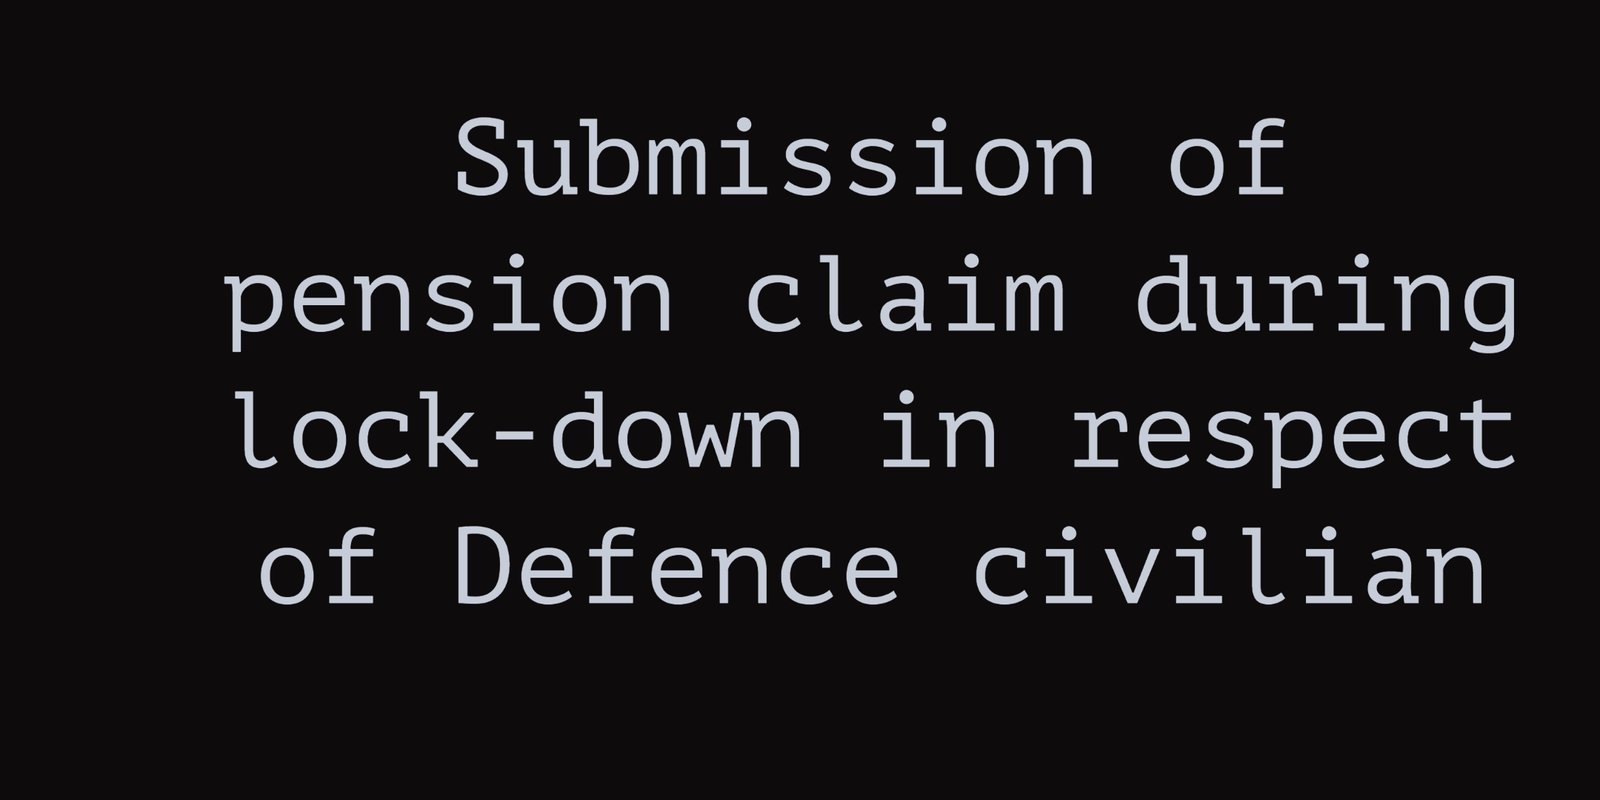 Submission of pension claim during lock-down